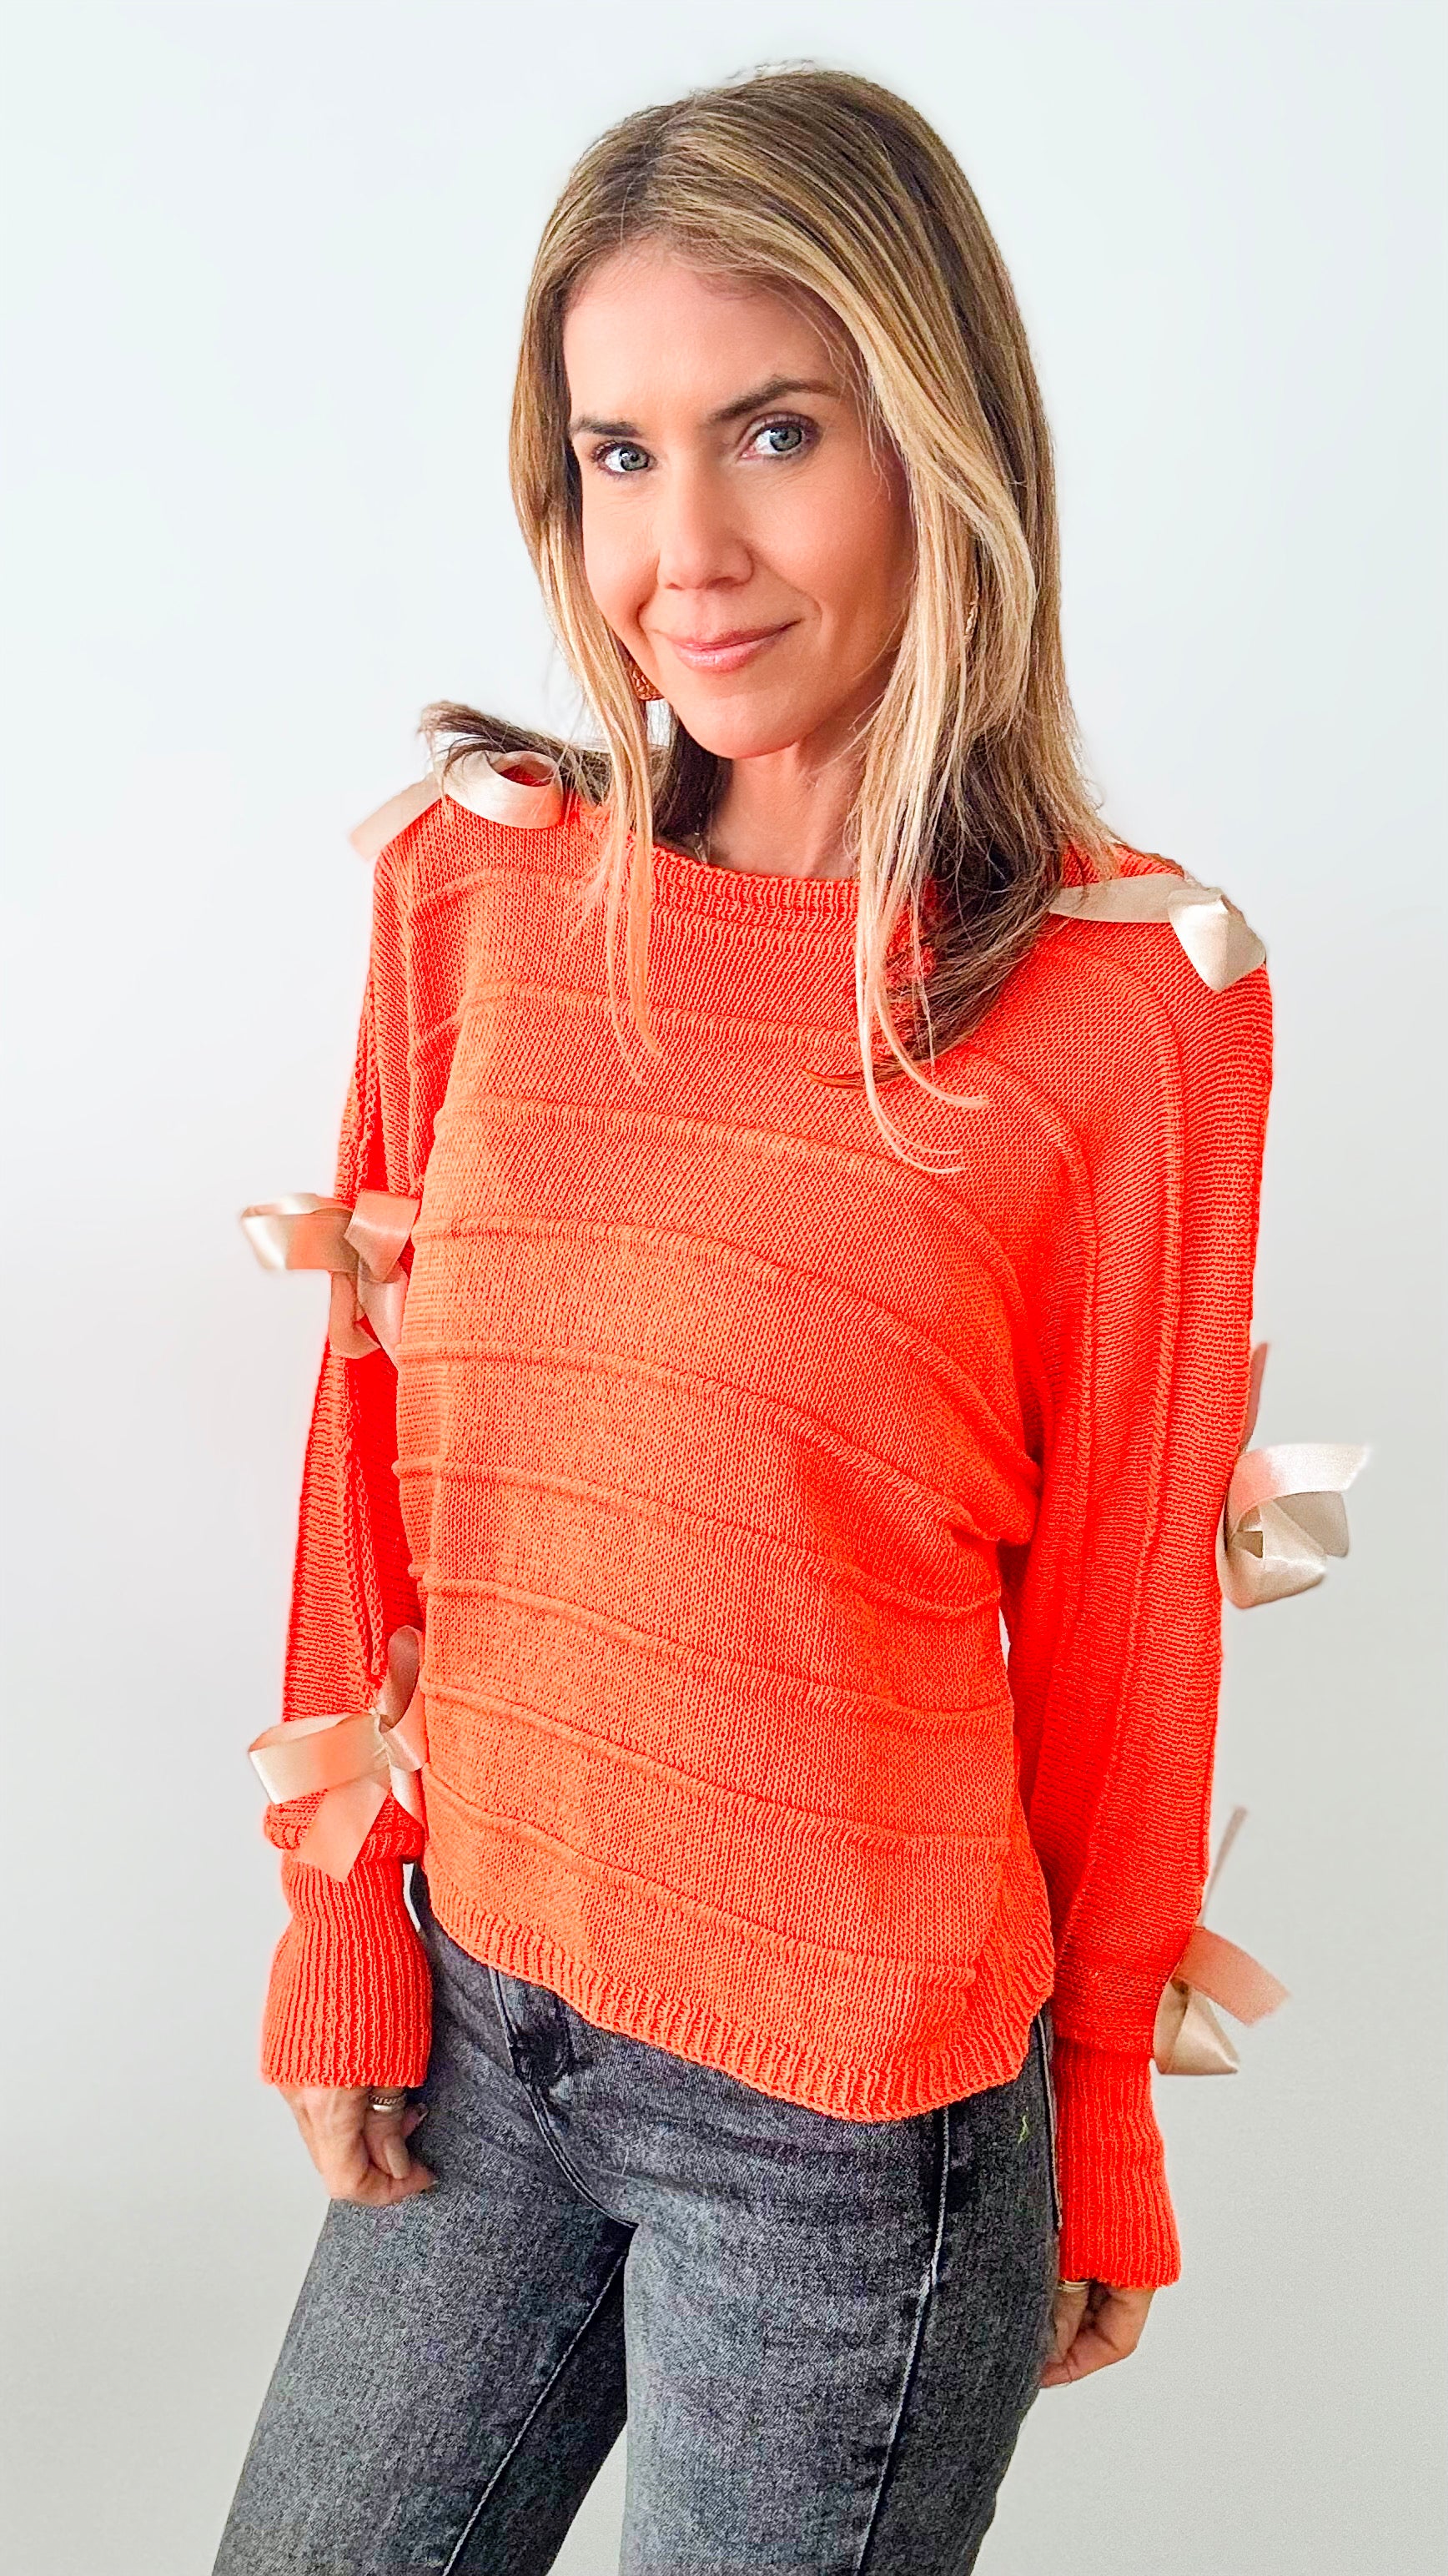 Satin Elegance Italian Sweater - Orange-140 Sweaters-Germany-Coastal Bloom Boutique, find the trendiest versions of the popular styles and looks Located in Indialantic, FL